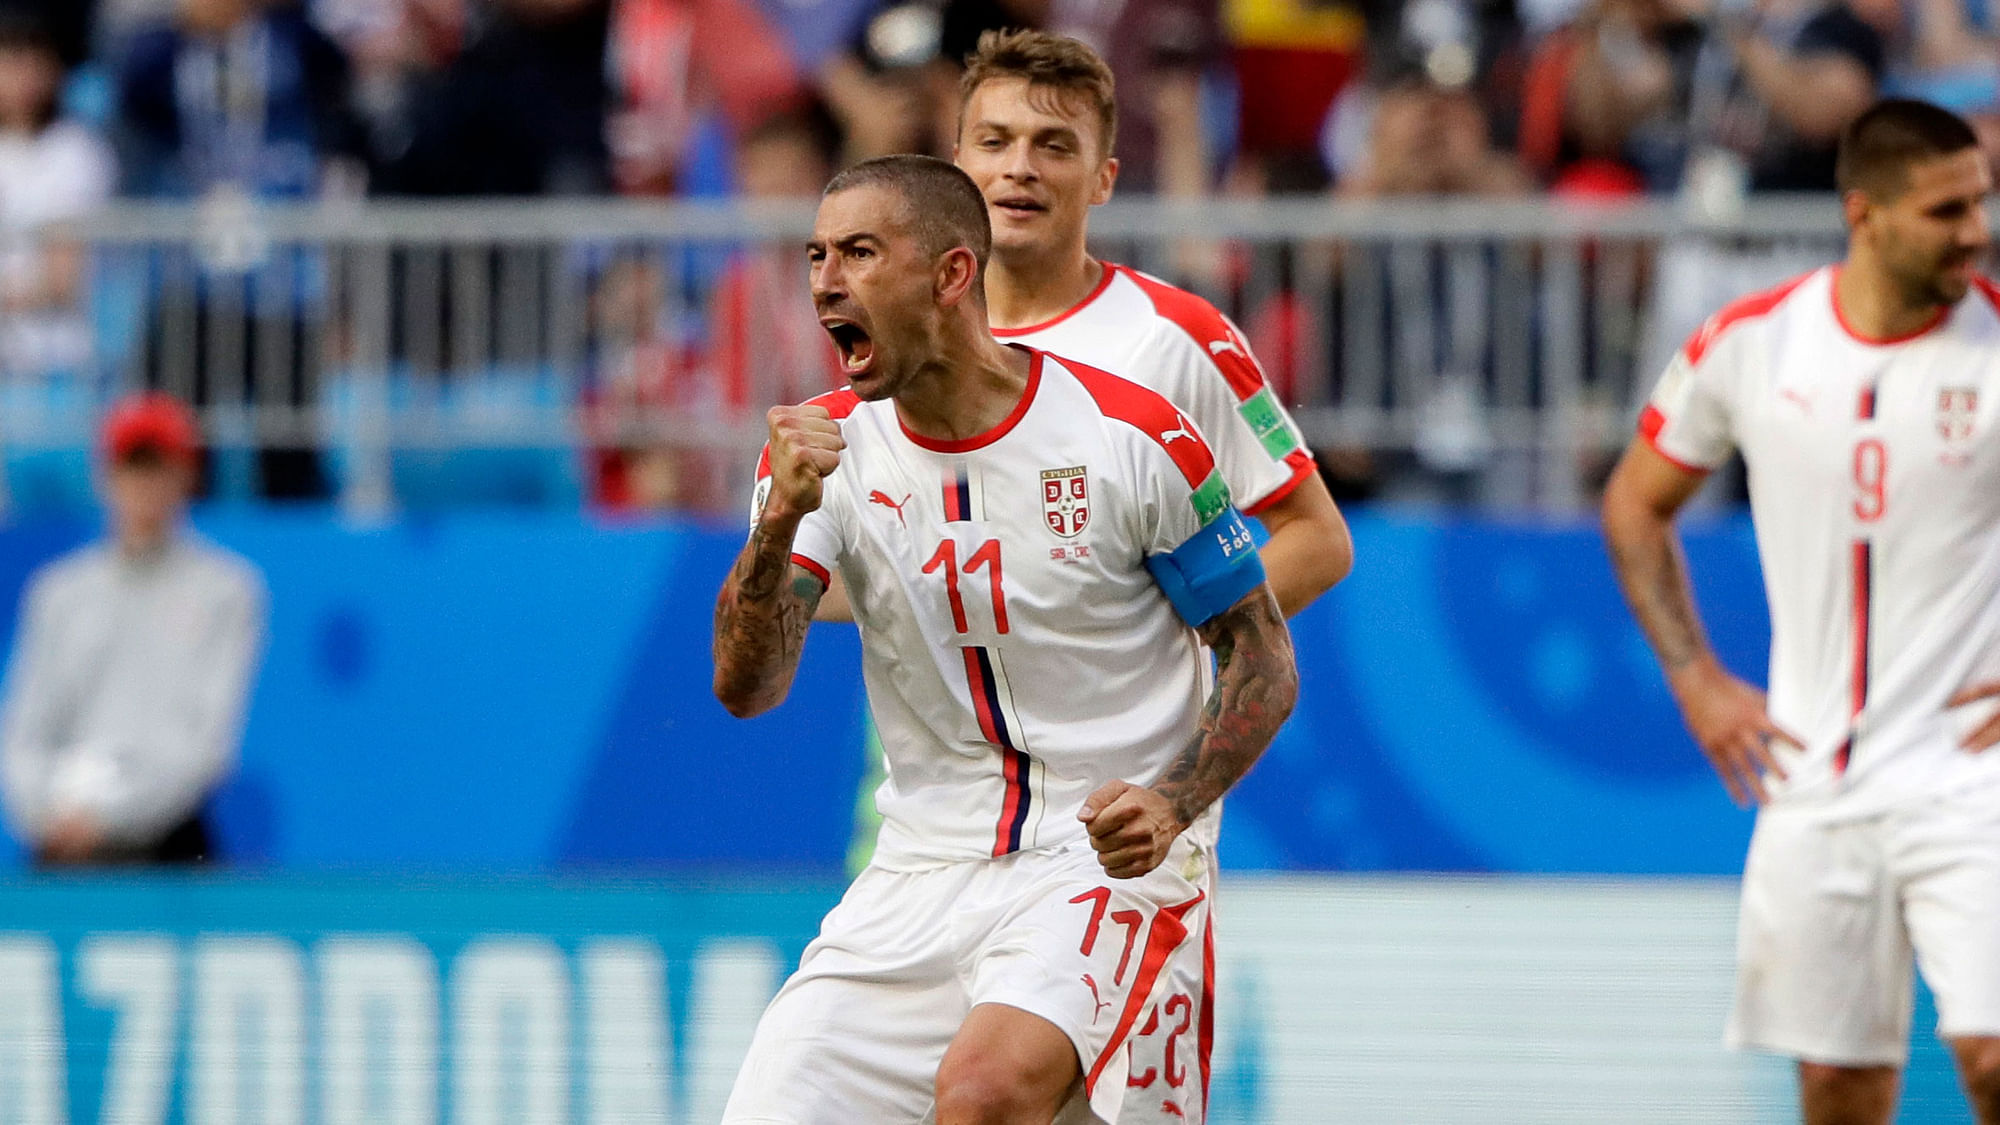 Serbia’s Aleksandar Kolarov celebrates after scoring the opening goal during the group E match between Costa Rica and Serbia.